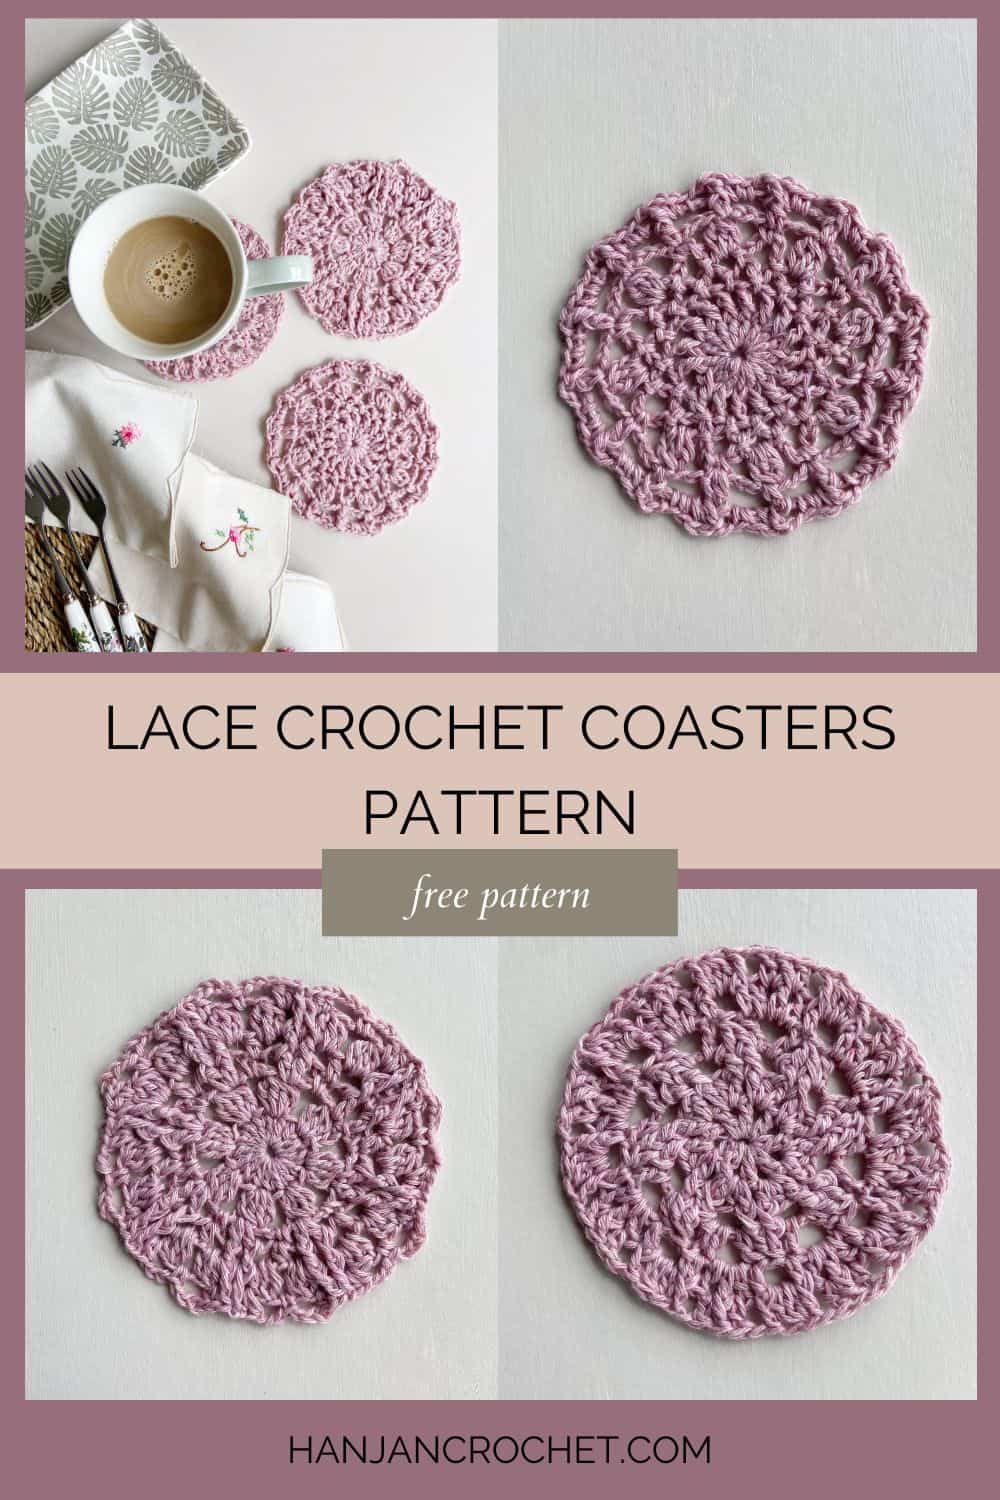 Free crochet coaster pattern images.